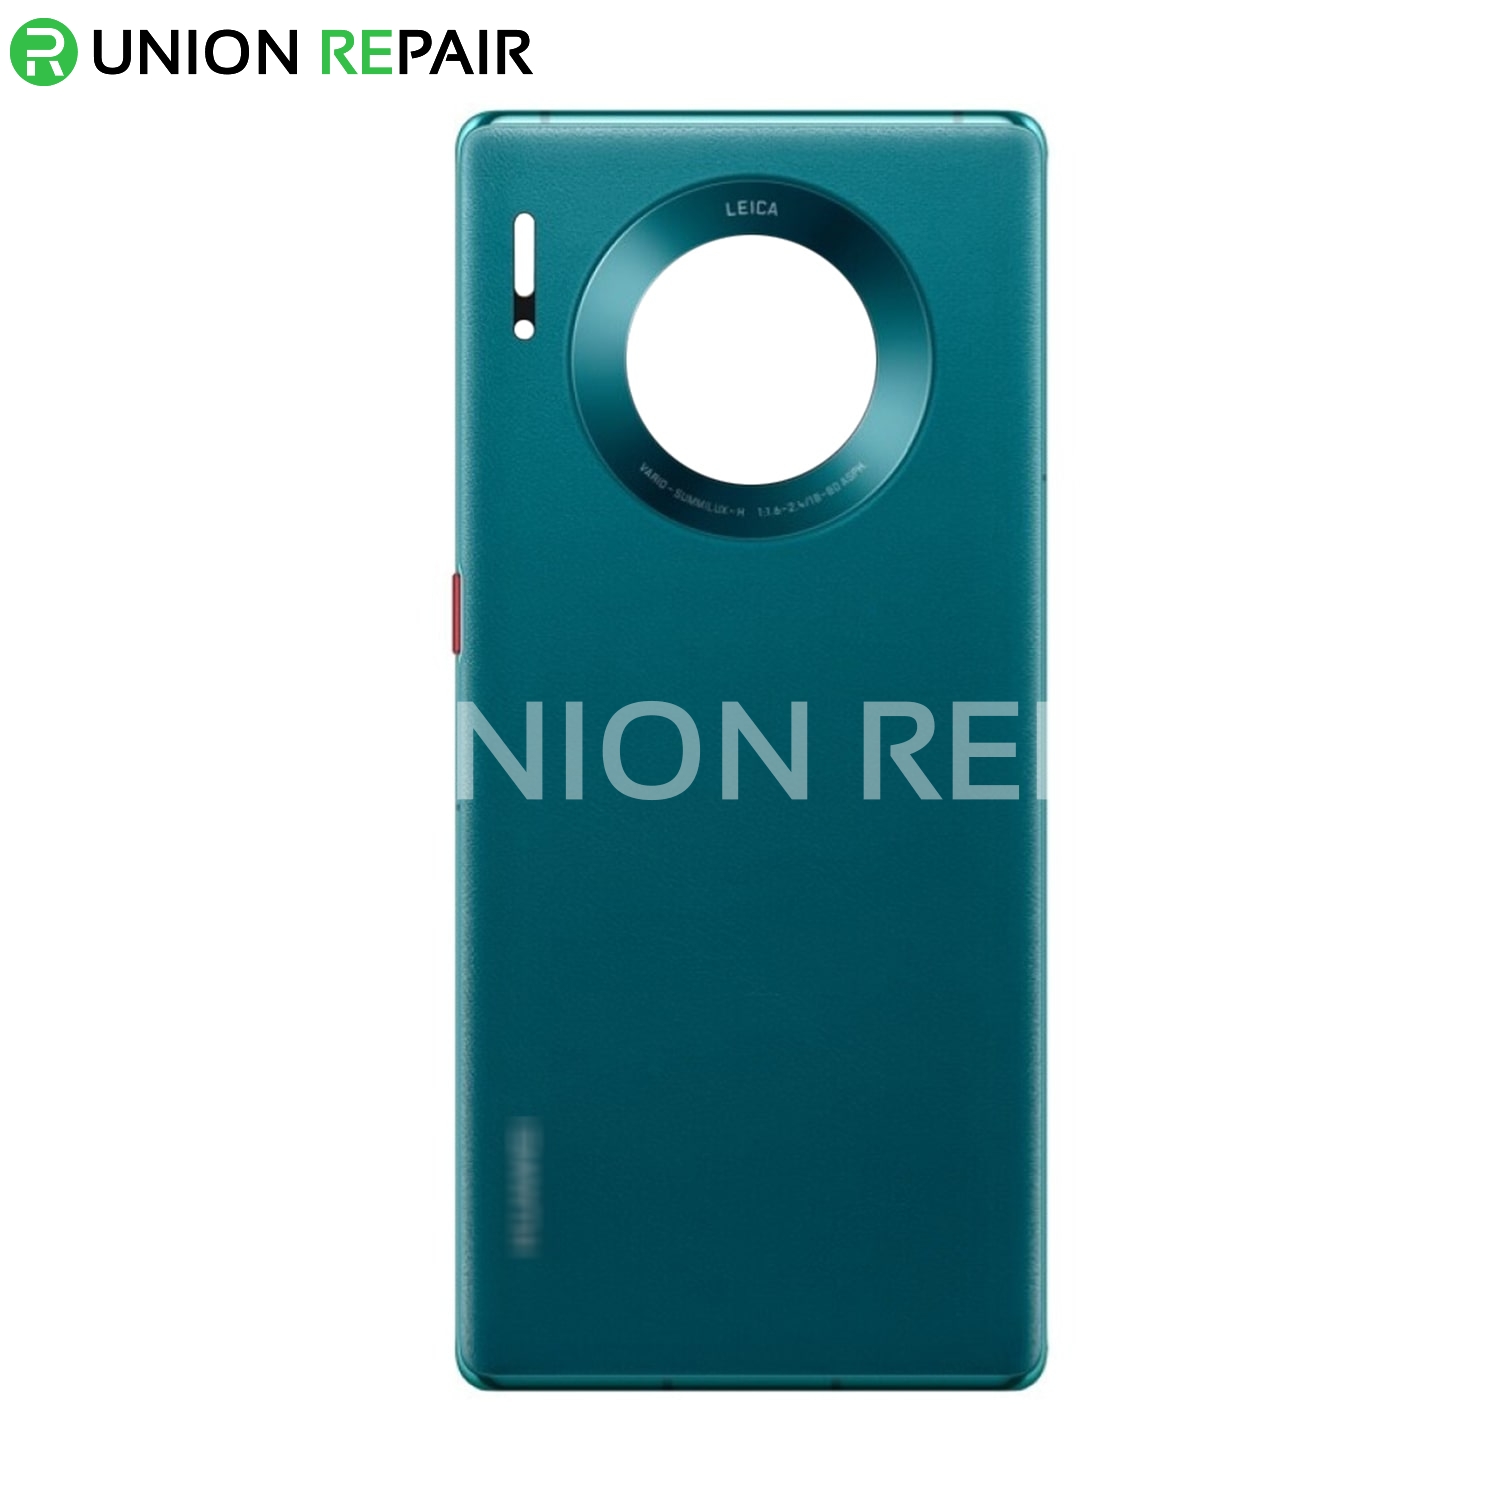 Replacement for Huawei Mate 30 Pro Battery Door - Forest Green